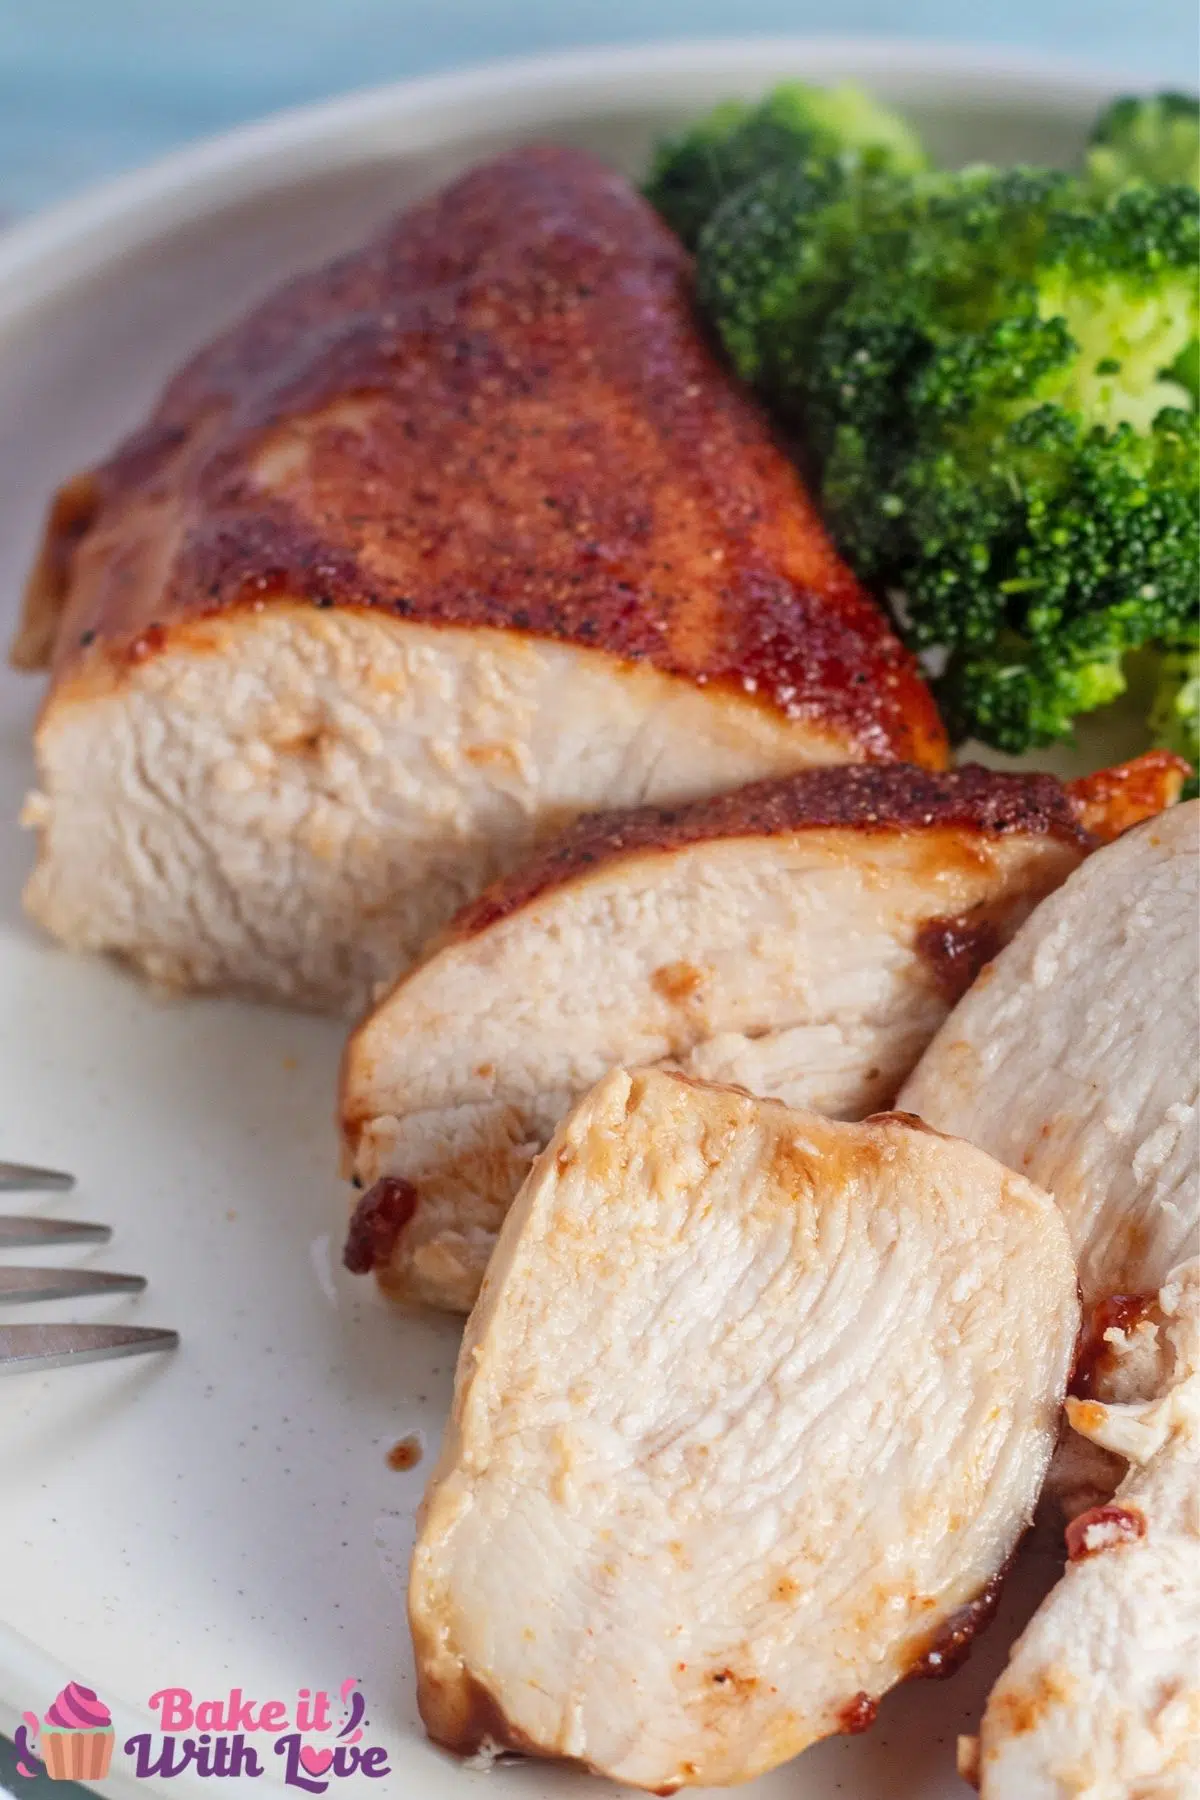 Tall image of the sliced baked bbq chicken breast on white plate.